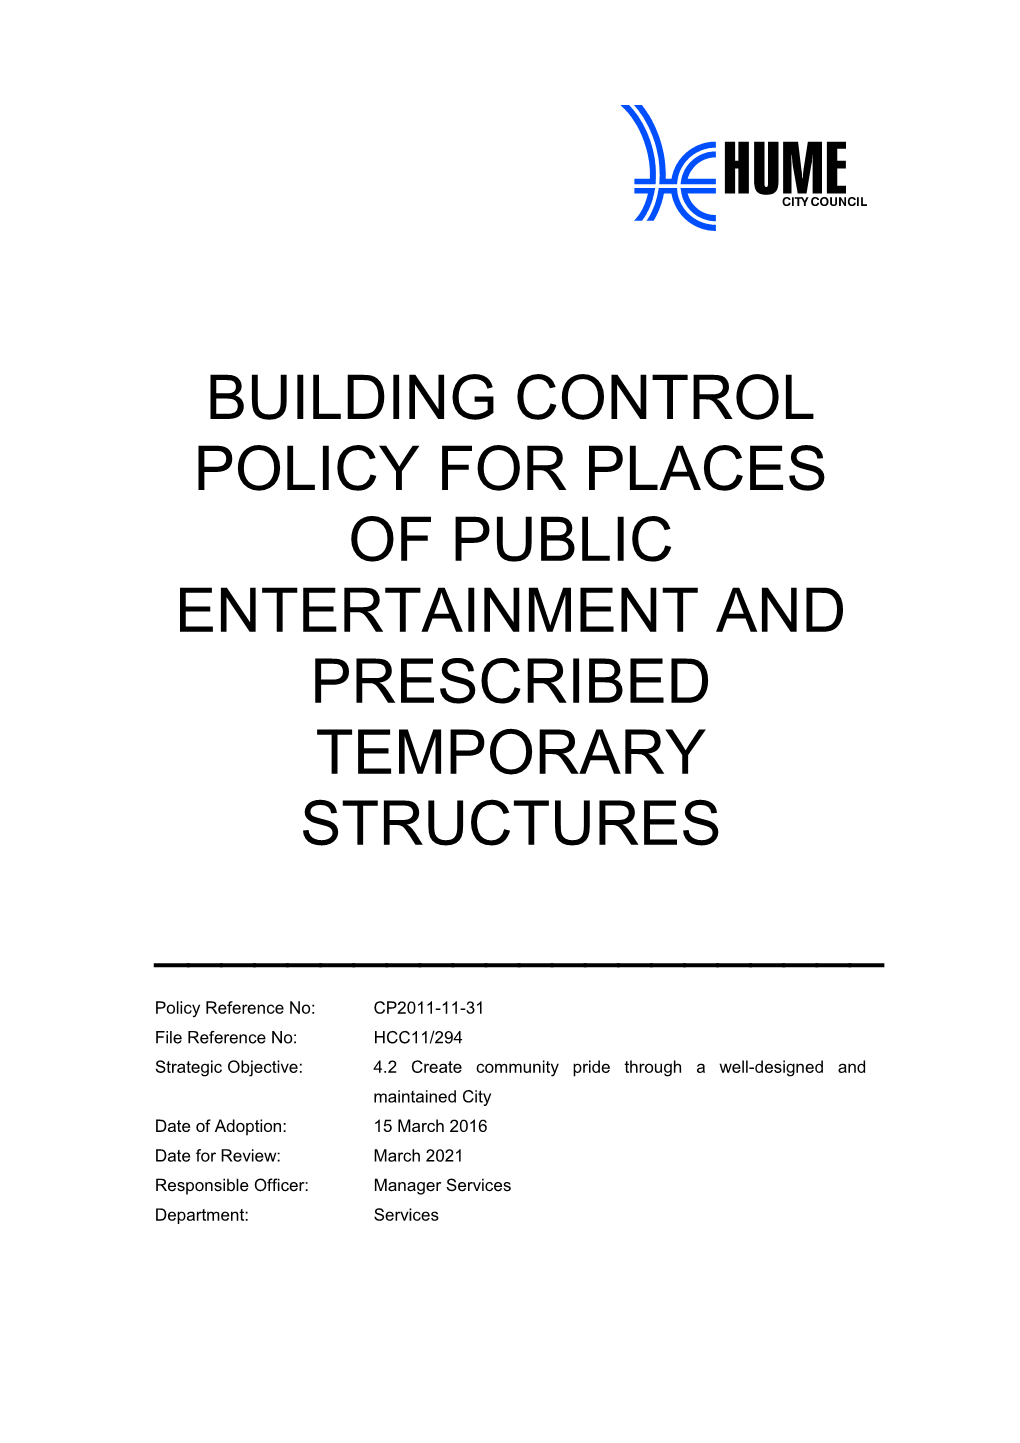 Building Control Policy for Places of Public Entertainment and Prescribed Temporary Structures